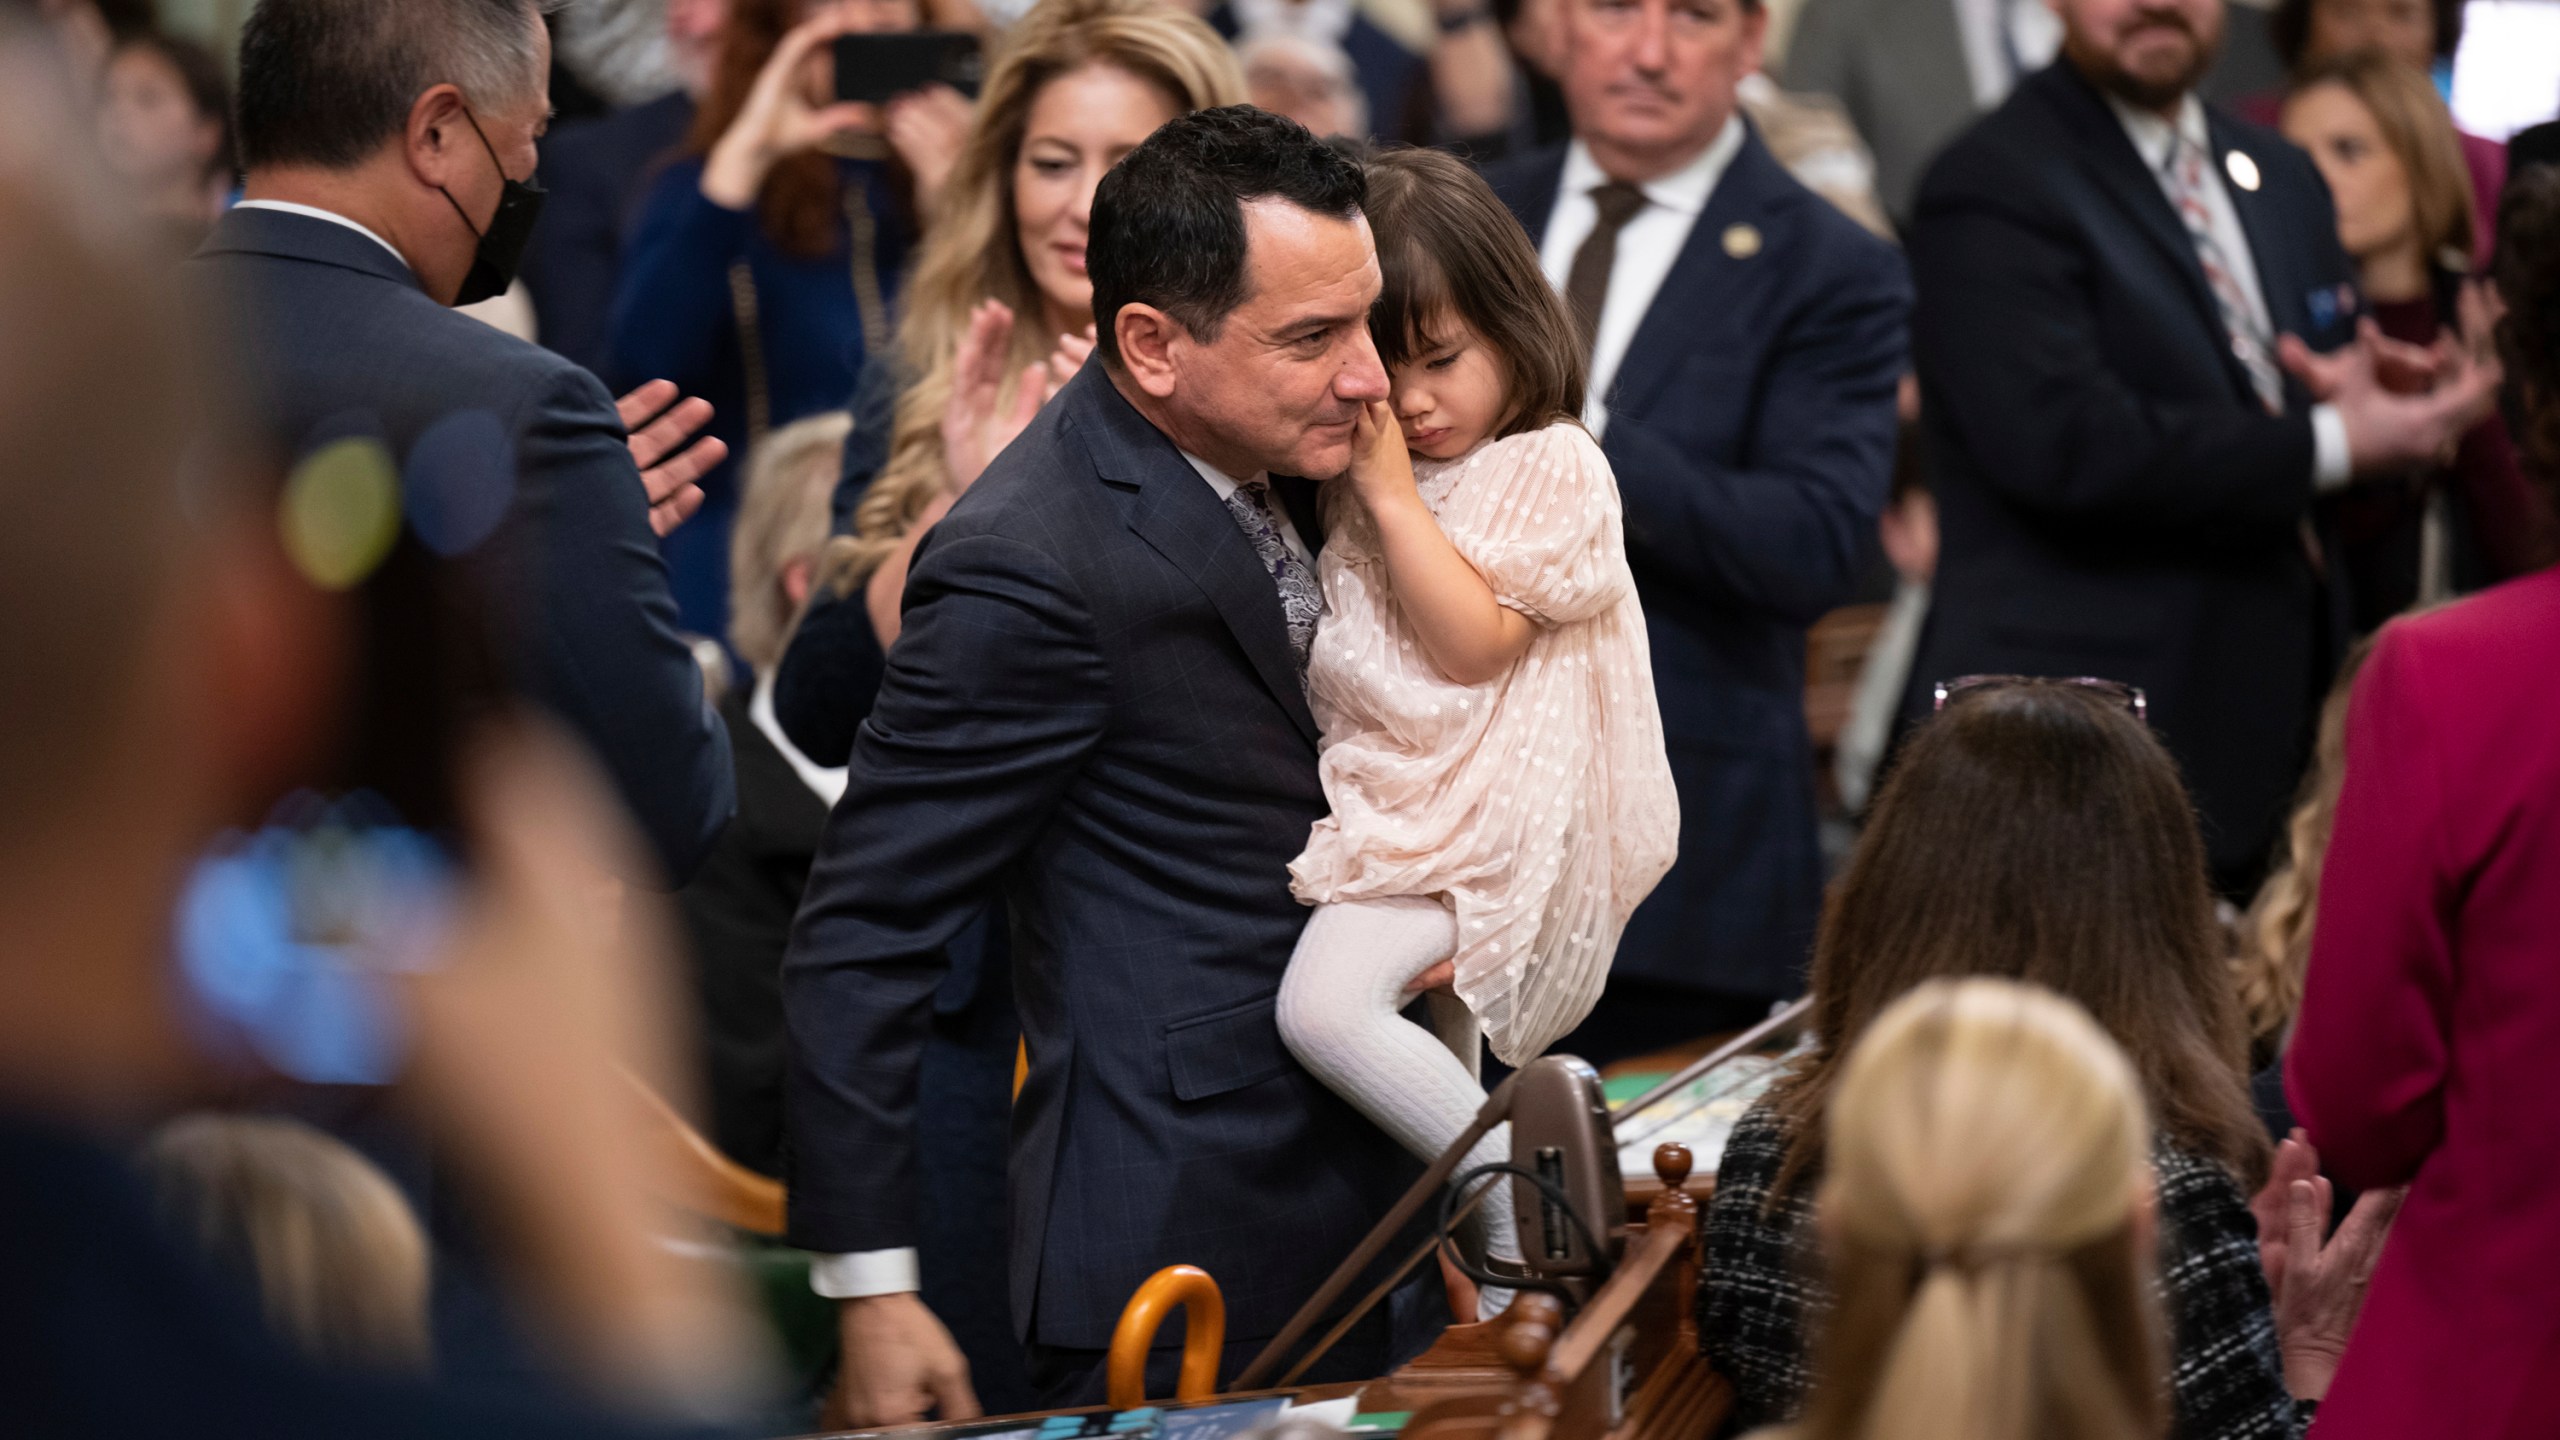 FILE - Assemblyman Anthony Rendon walks with his daughter Vienna before being sworn in as Speaker of the Assembly during the opening session of the California Legislature in Sacramento, Calif., Monday, Dec. 5, 2022. Rendon created the Select Committee on Happiness and Public Policy Outcomes to study how state policy can make Californians happier. (AP Photo/José Luis Villegas, Pool,File)